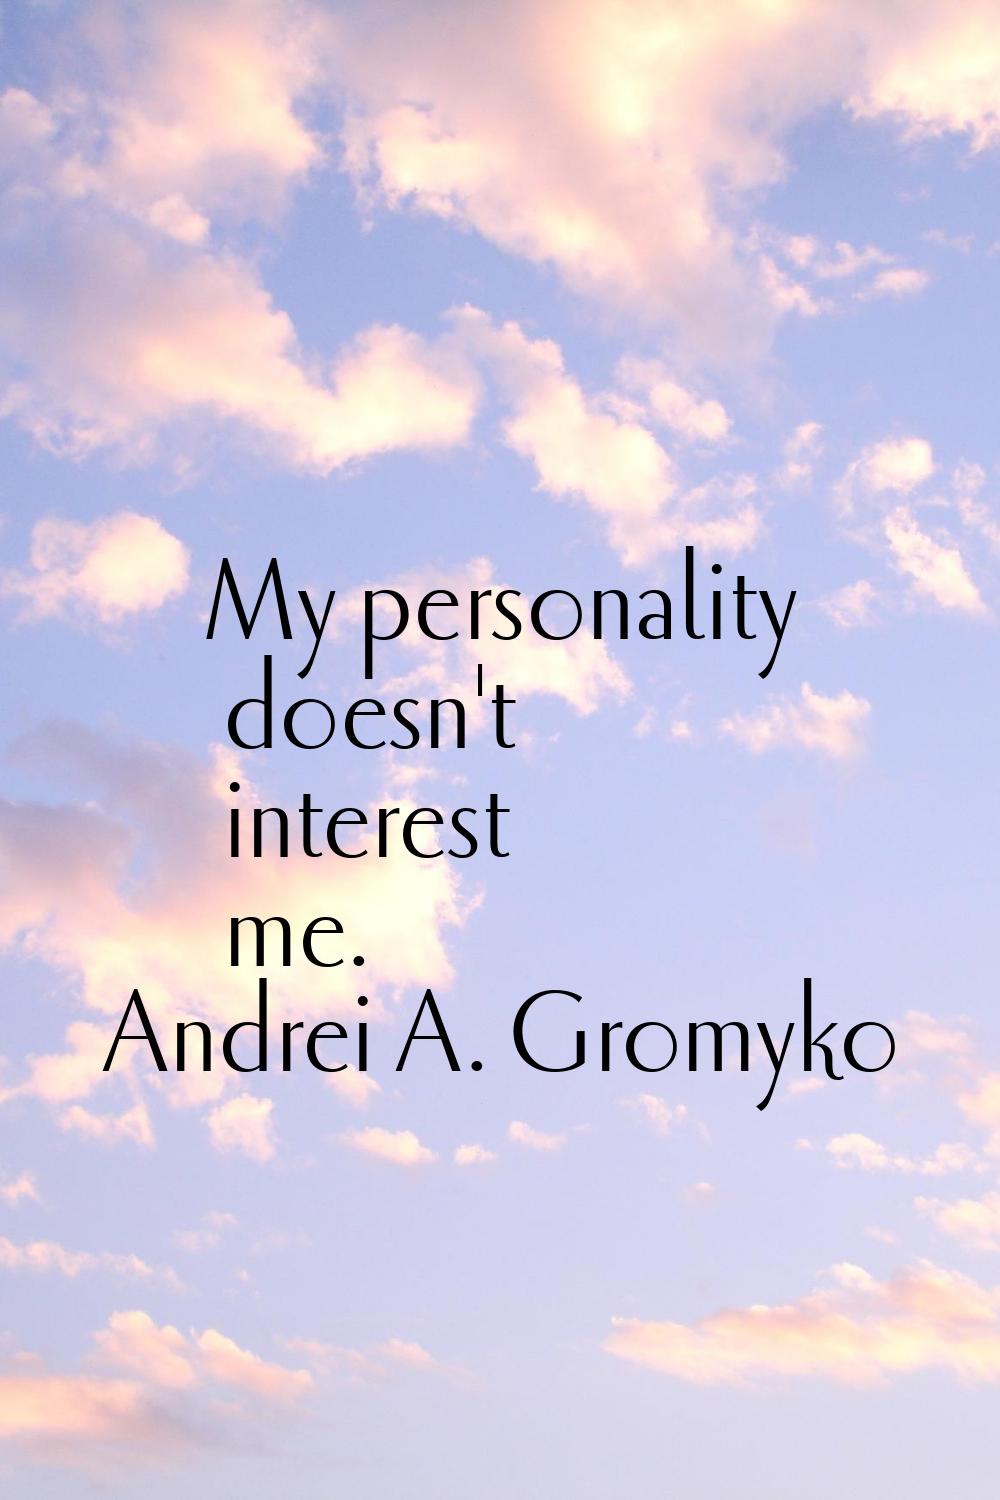 My personality doesn't interest me.